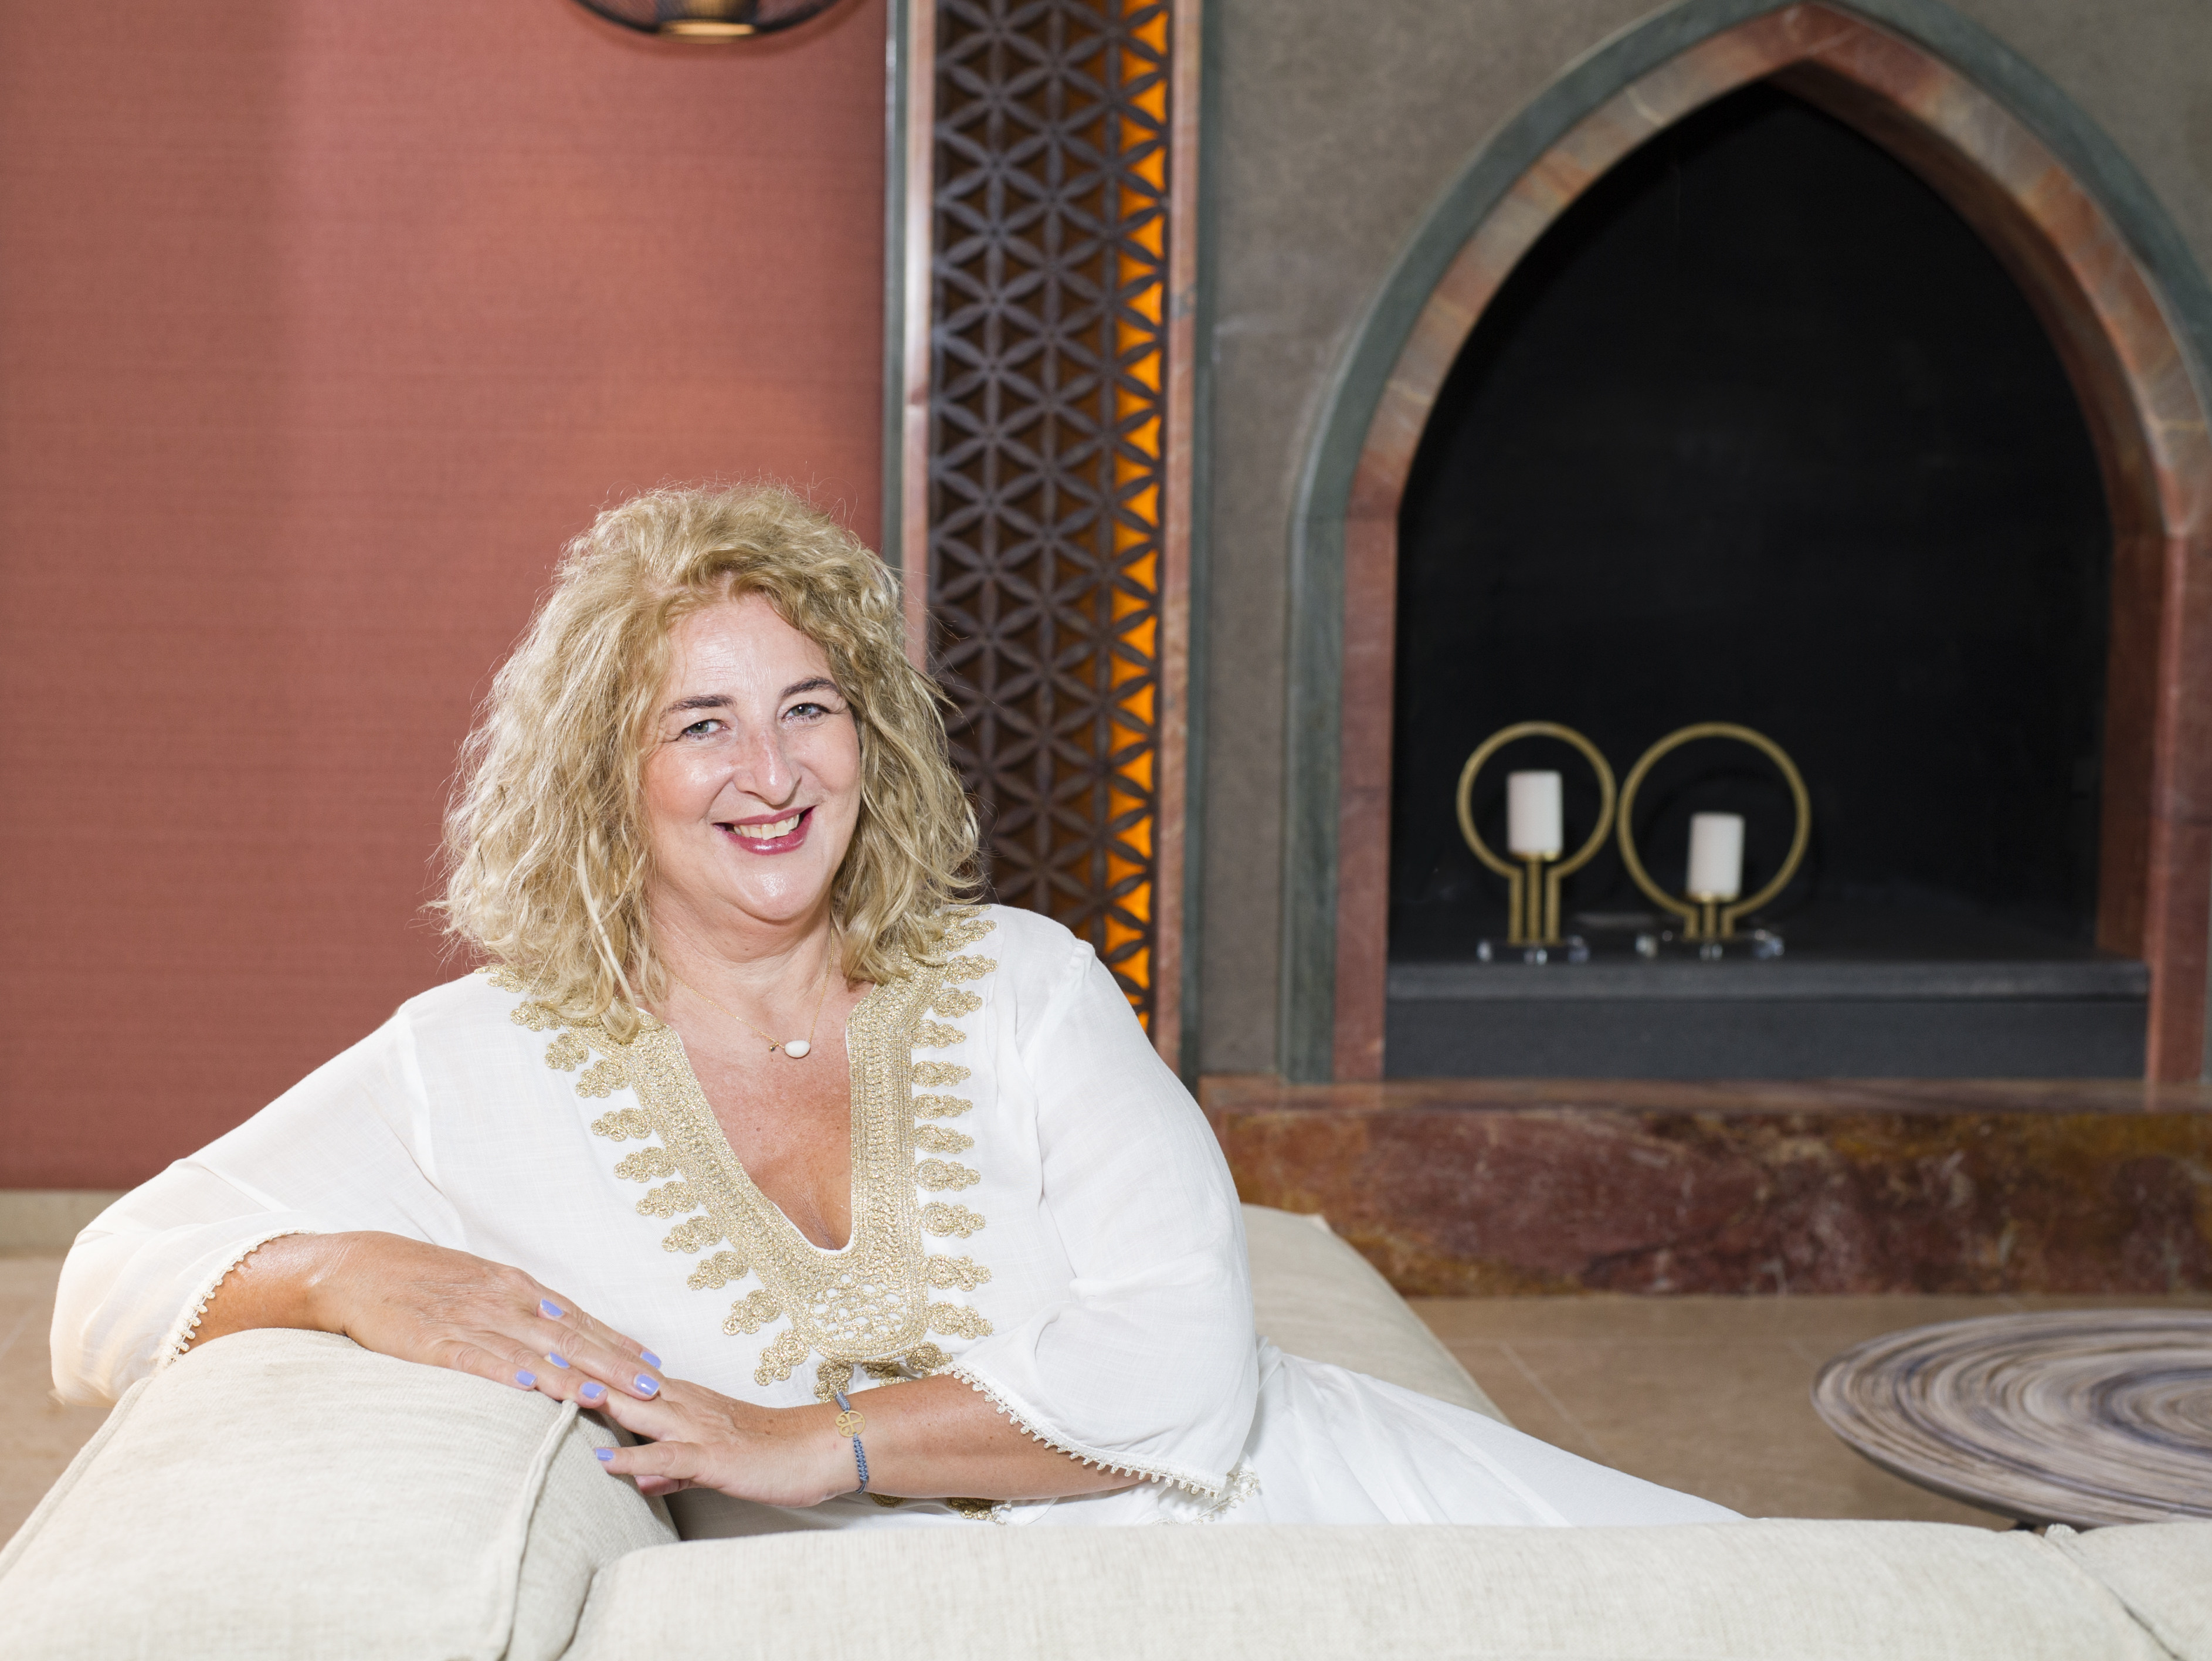 Marina Efraimoglou was diagnosed with non-Hodgkin lymphoma, a cancer of the blood, aged 29, and later with breast cancer - which she says she overcame with just energy work, traditional Chinese medicine and self-awareness work. Photo: Euphoria Retreat